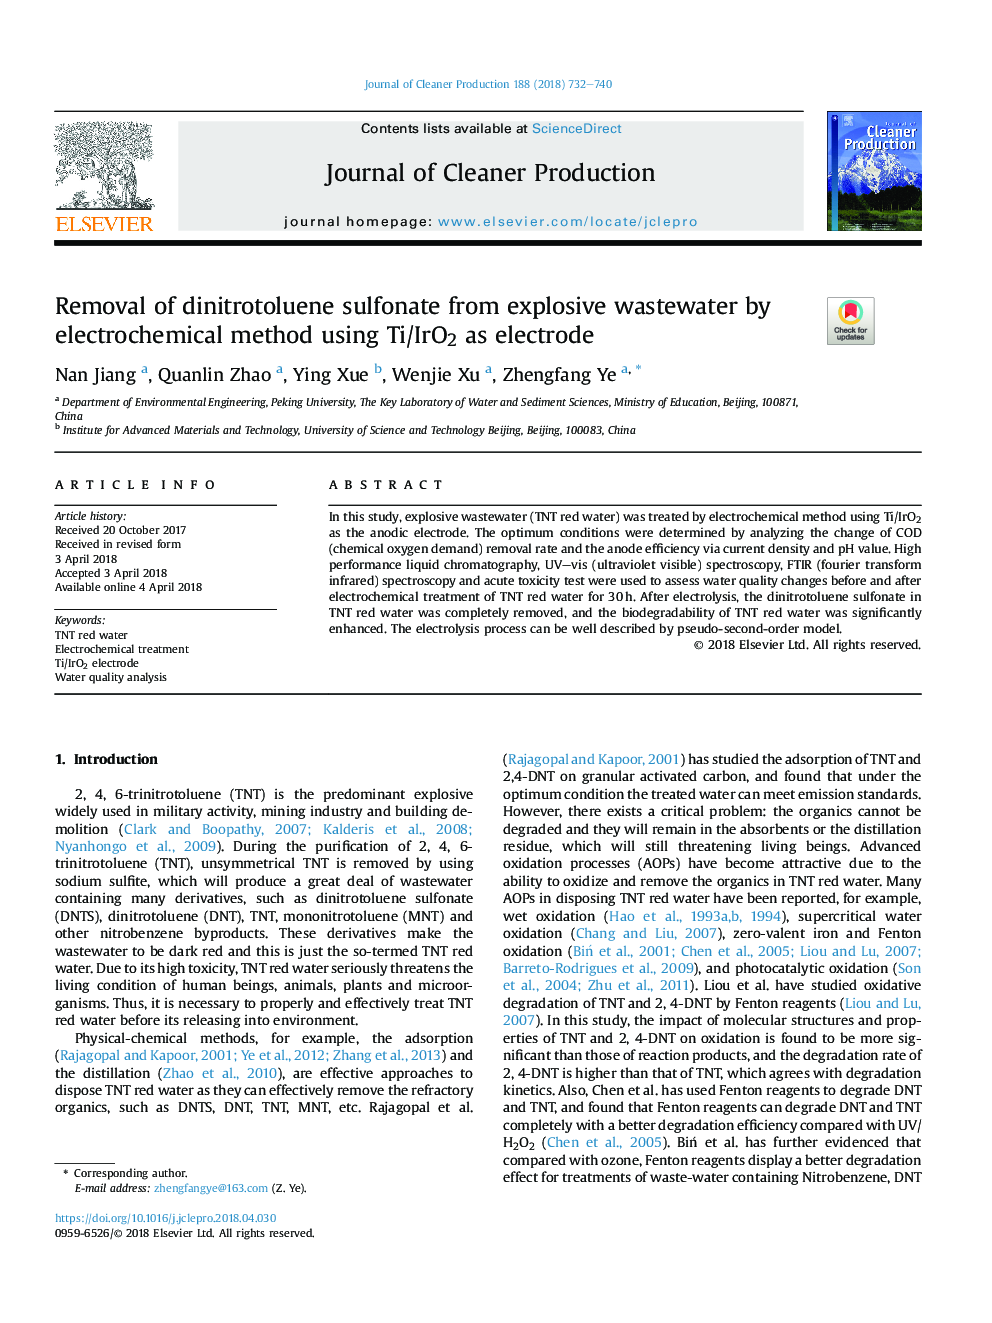 Removal of dinitrotoluene sulfonate from explosive wastewater by electrochemical method using Ti/IrO2 as electrode